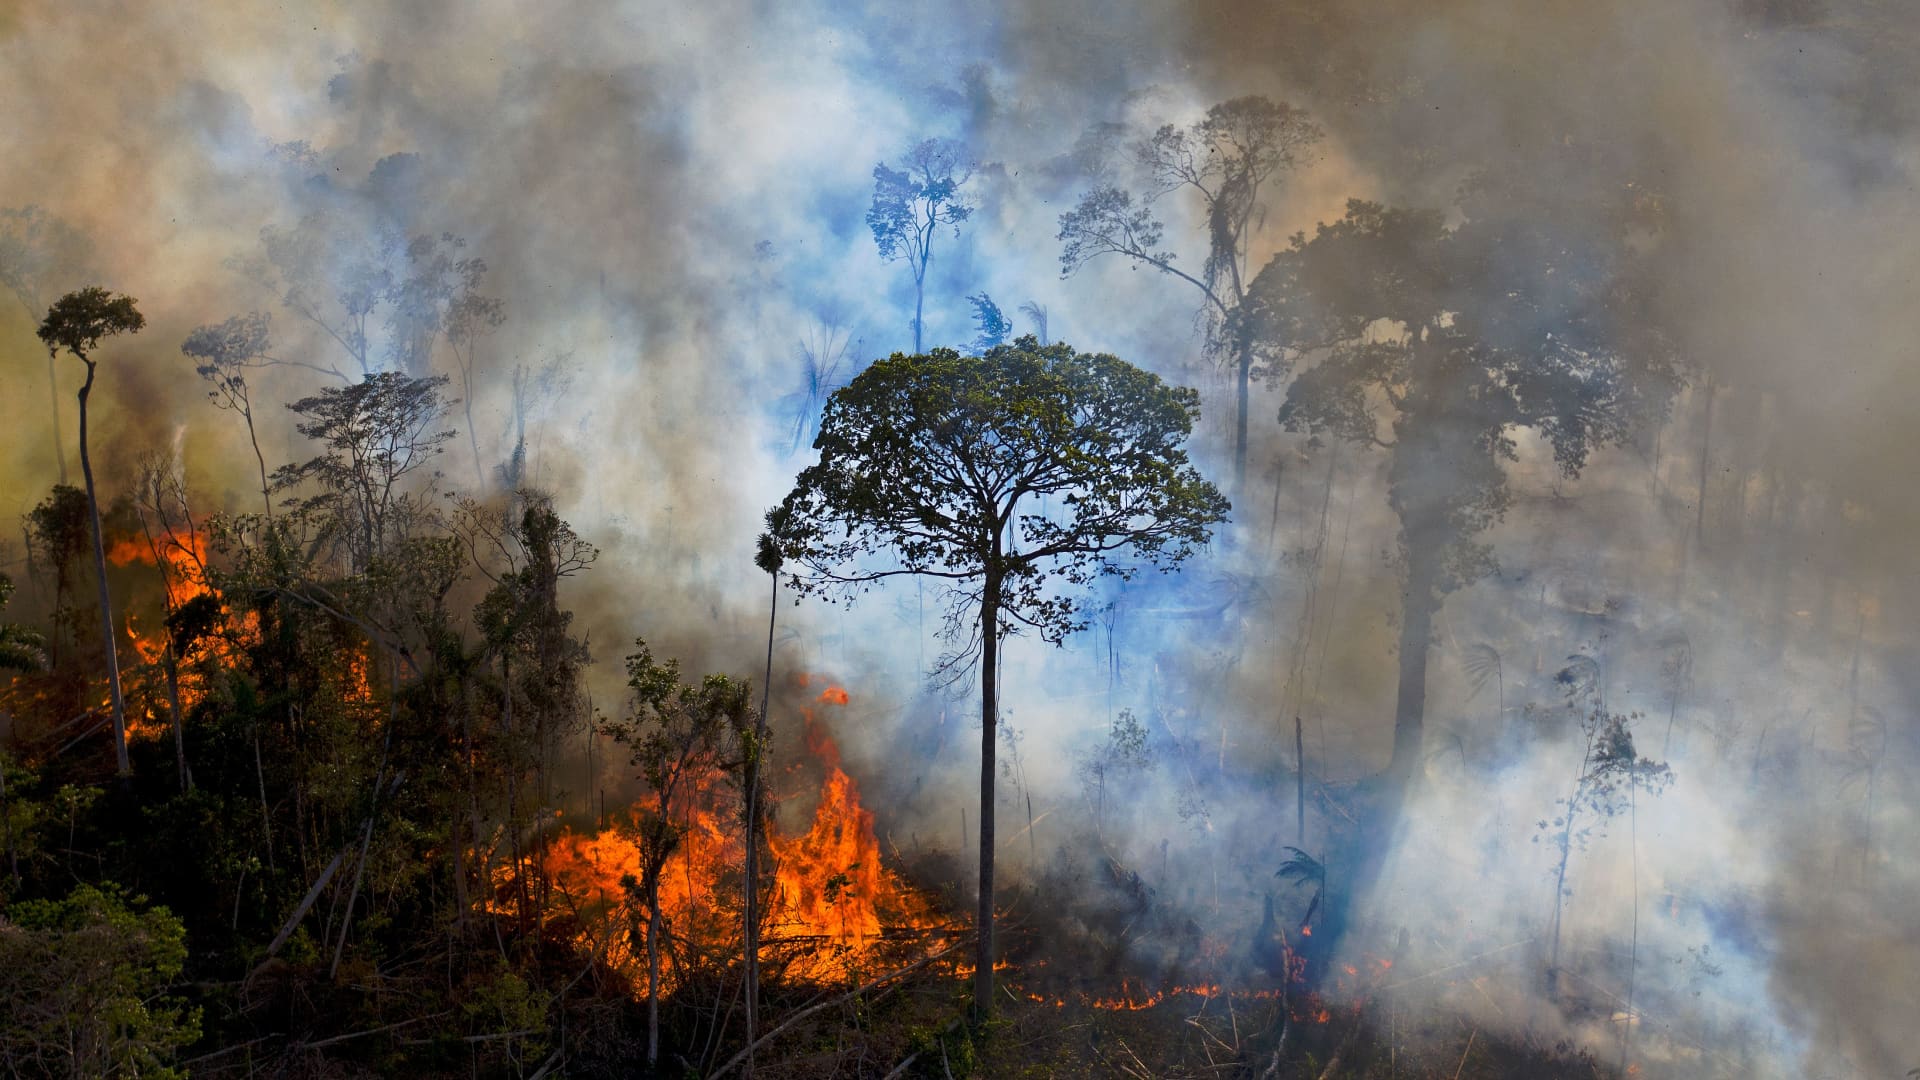 deforestation at highest level in 10 years, says Brazil